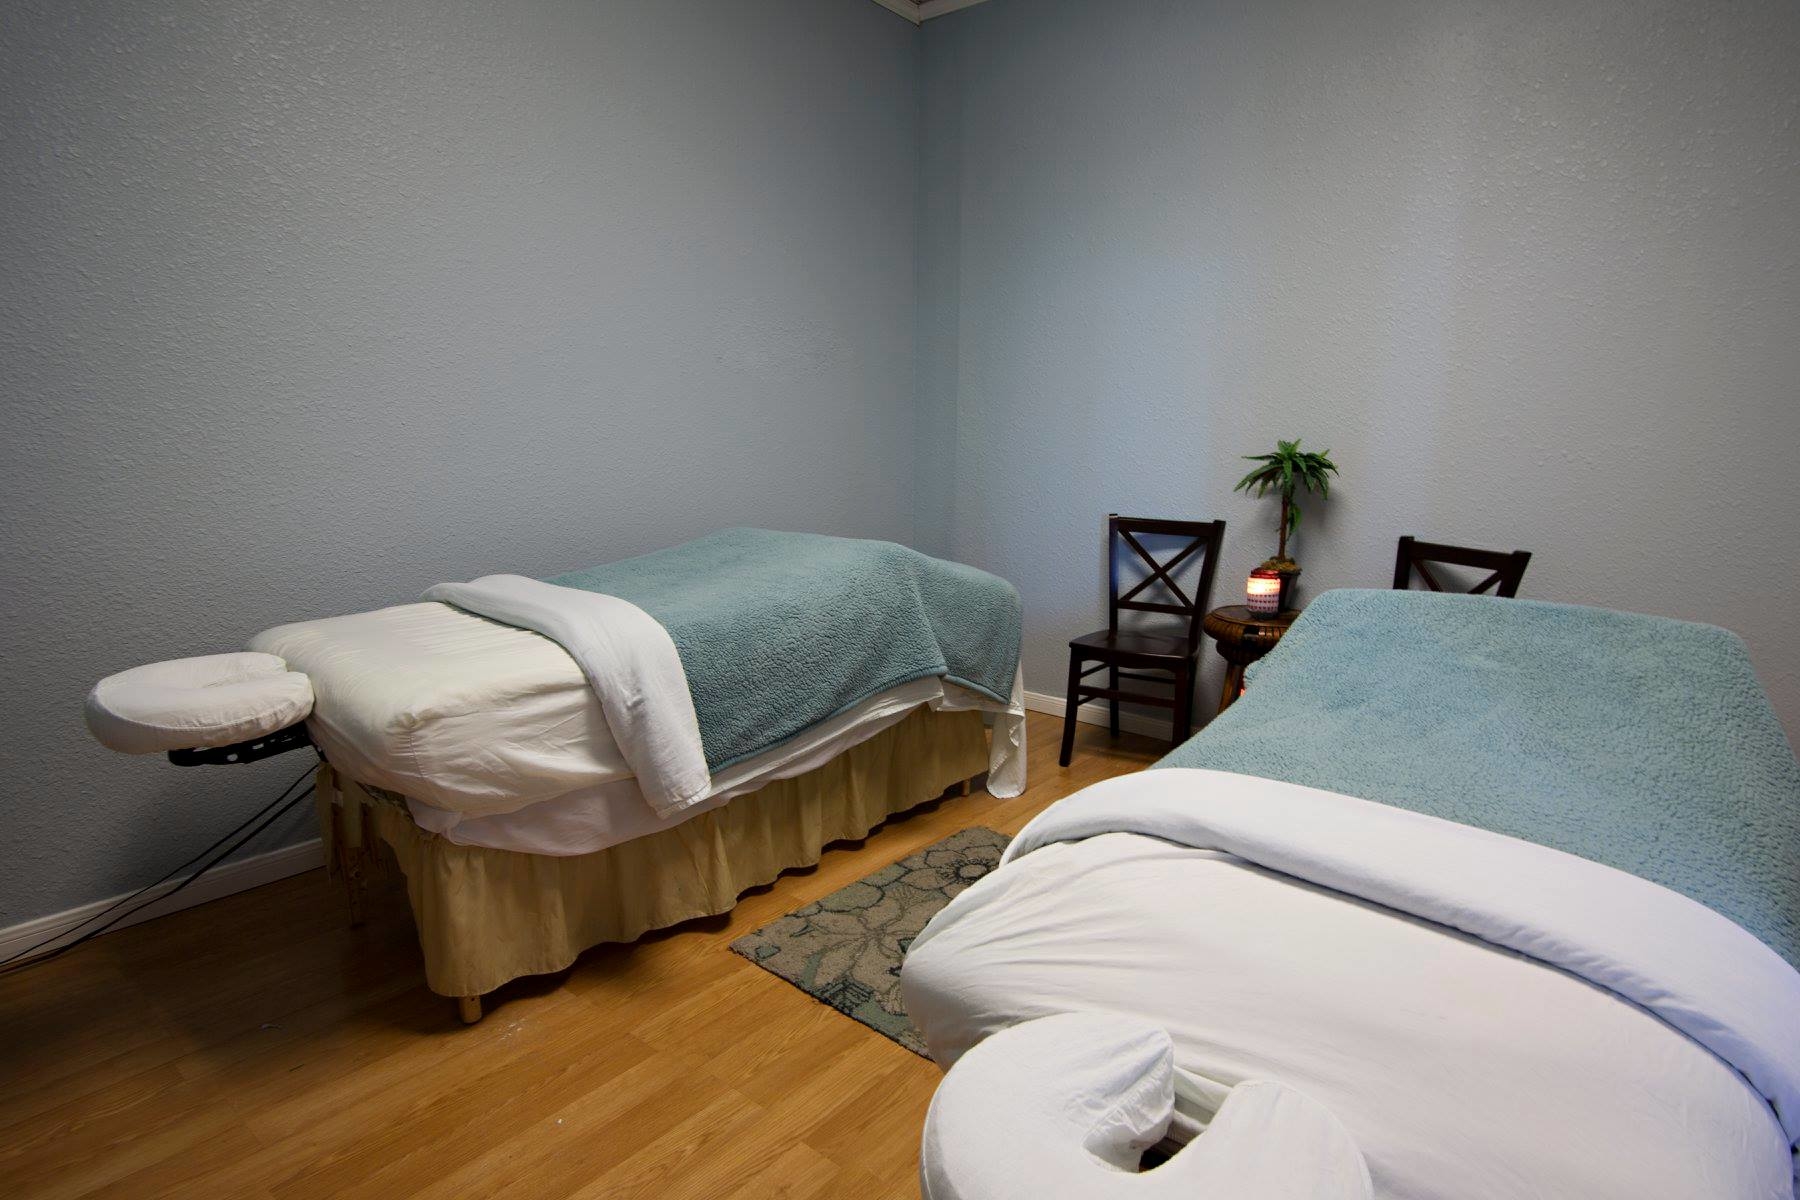 Island Day Spa Coupons near me in Corpus Christi | 8coupons